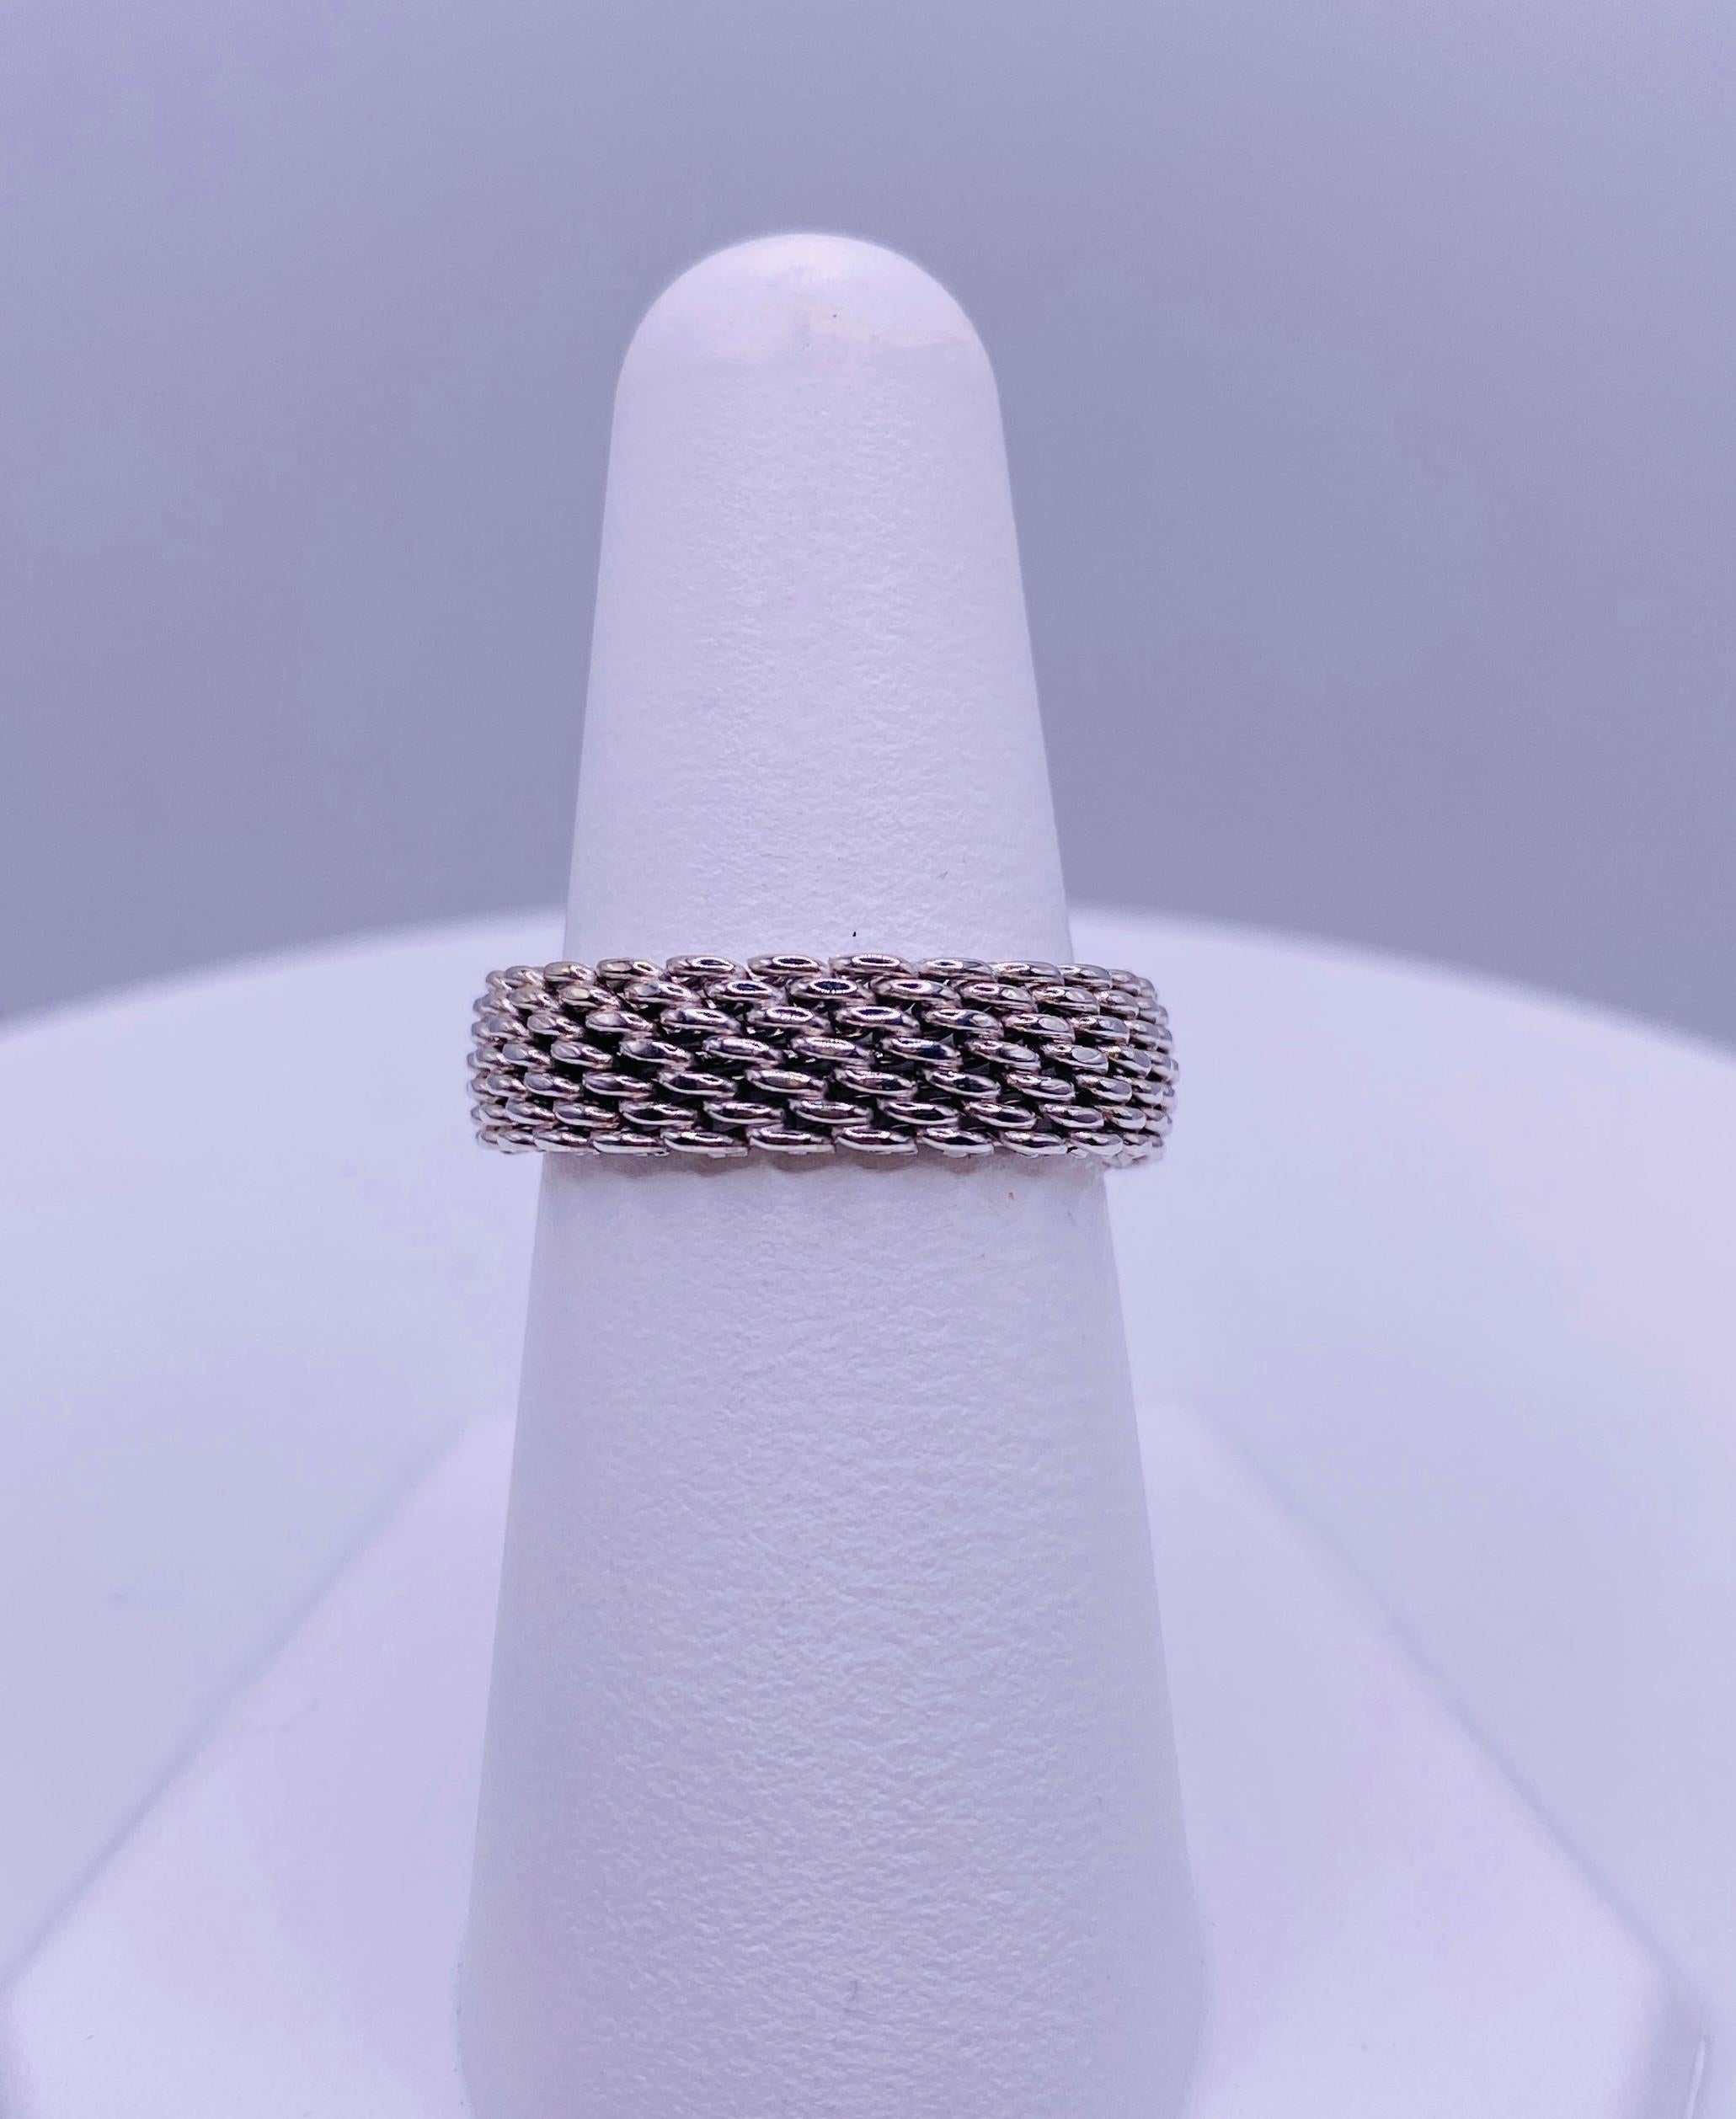 tiffany and co mesh ring